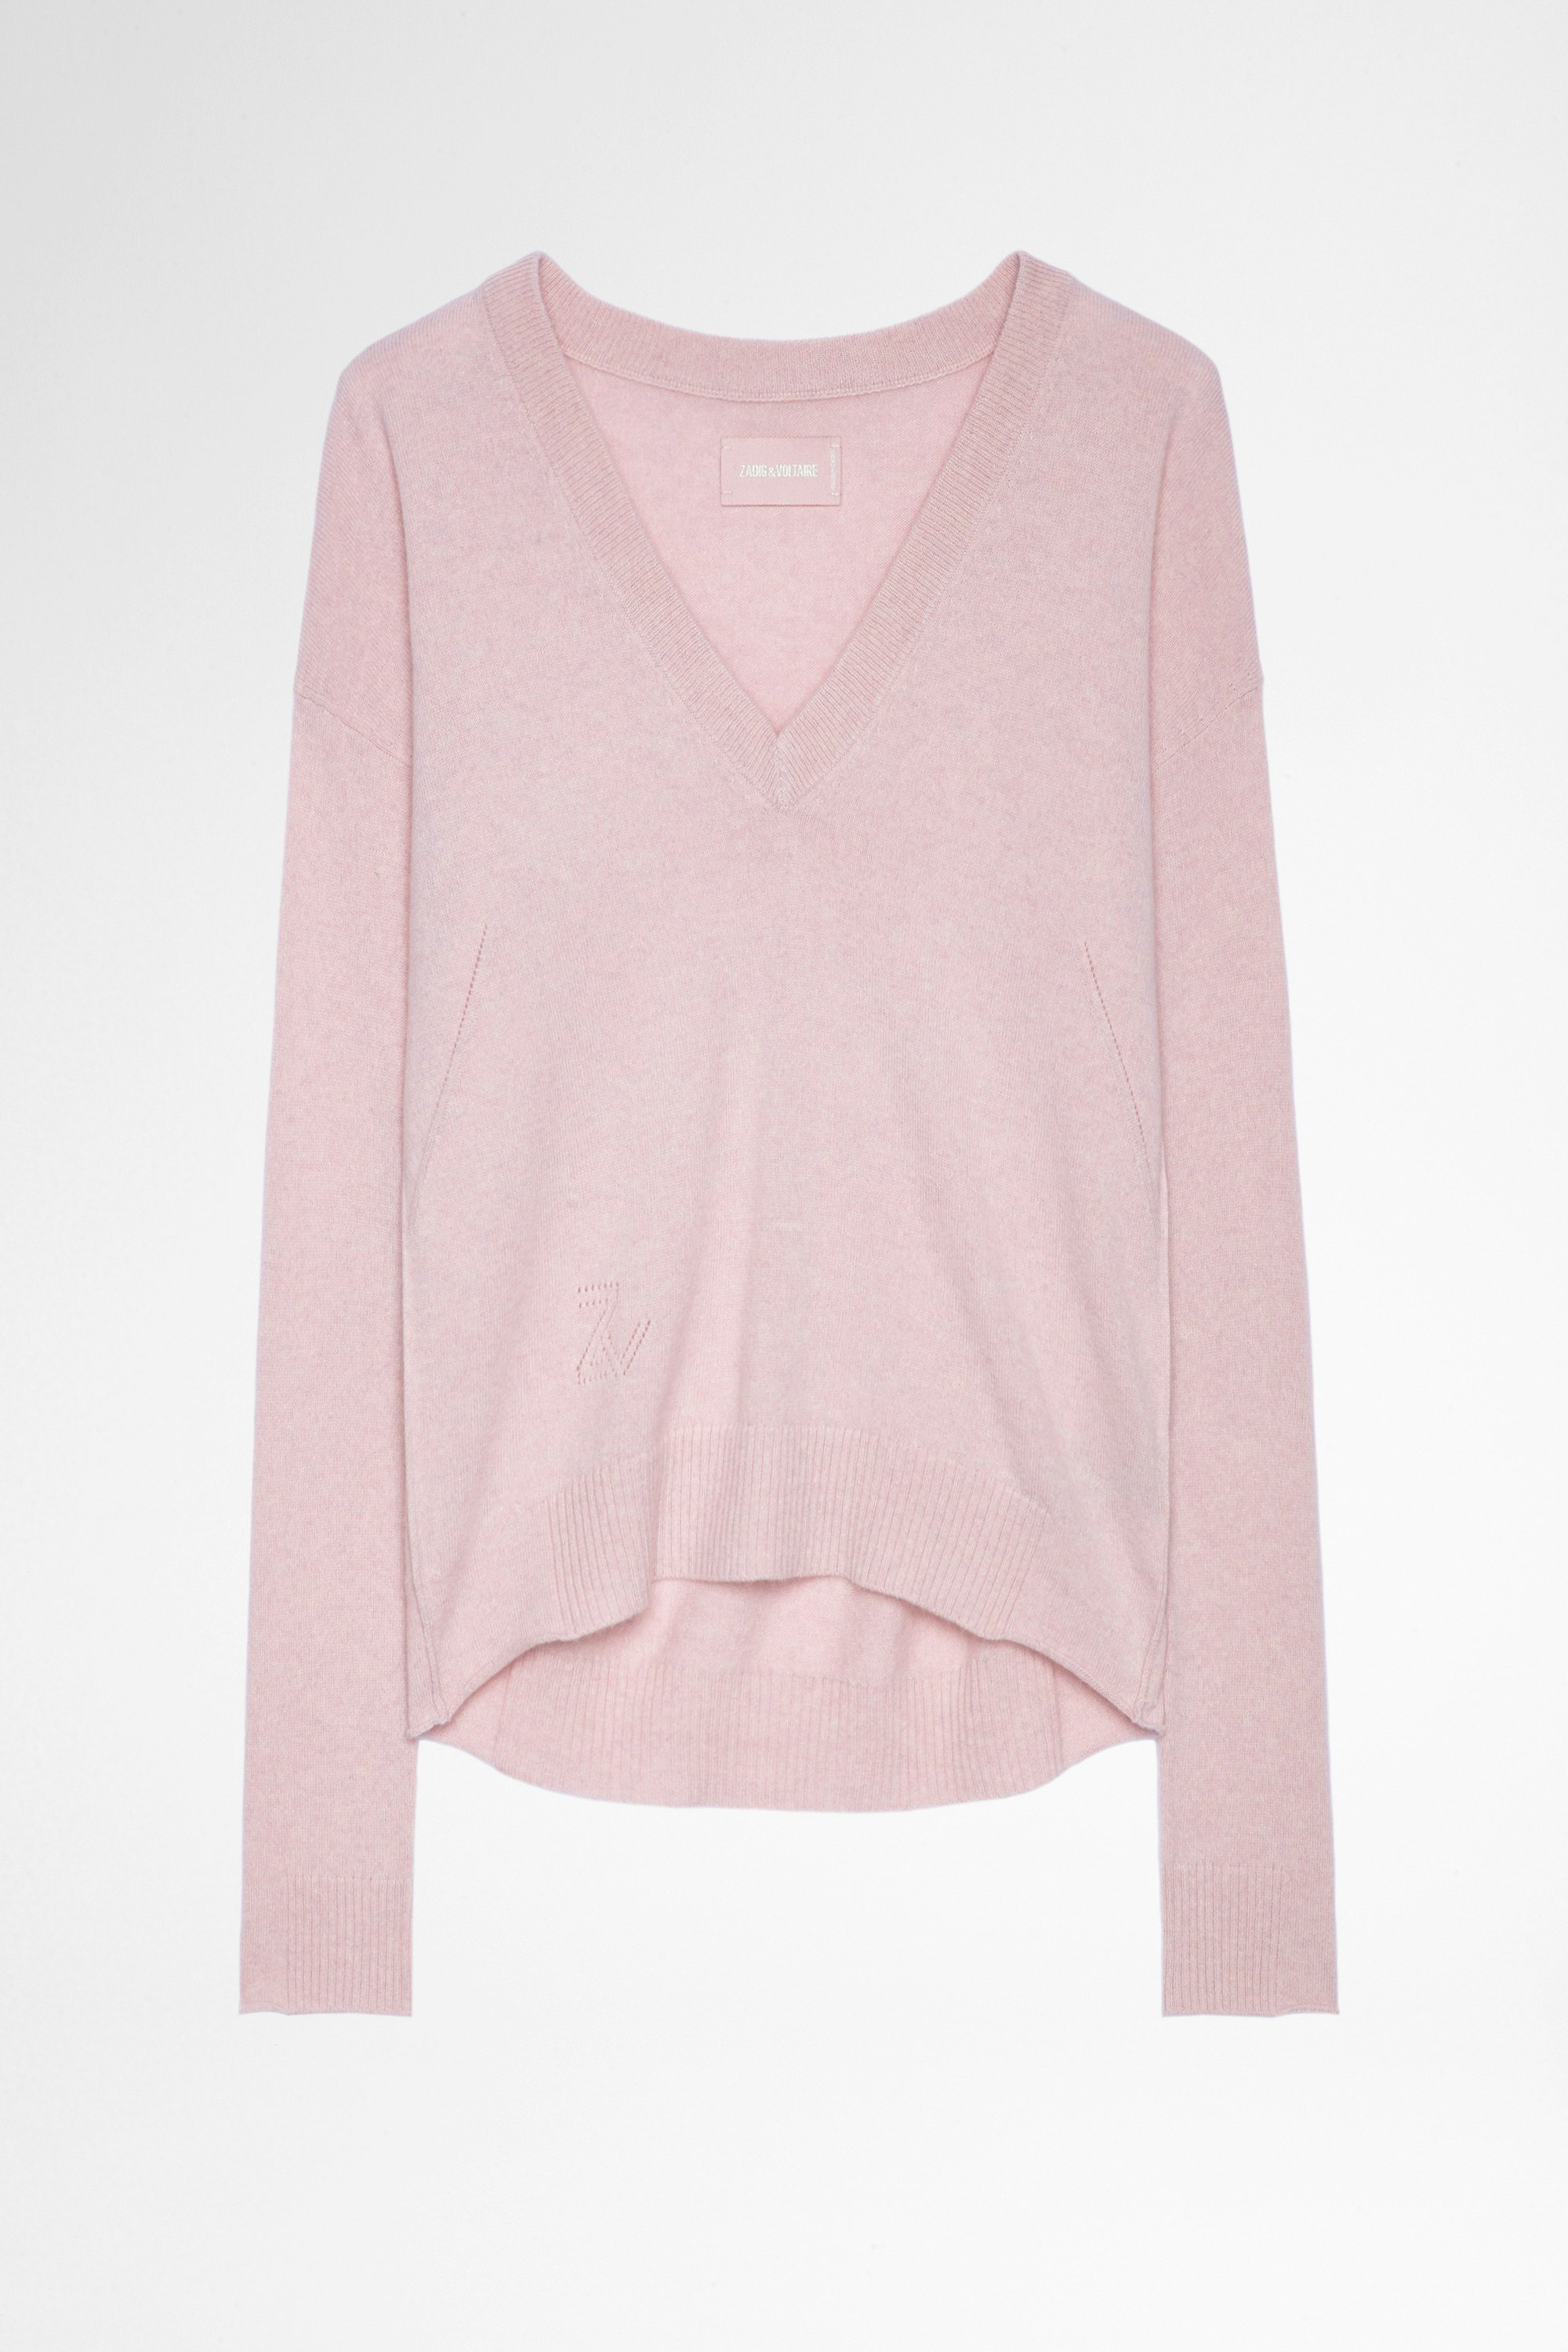 Vivi Patch Cashmere Jumper  Women's pink cashmere sweater with lightning bolt patch on the elbows 